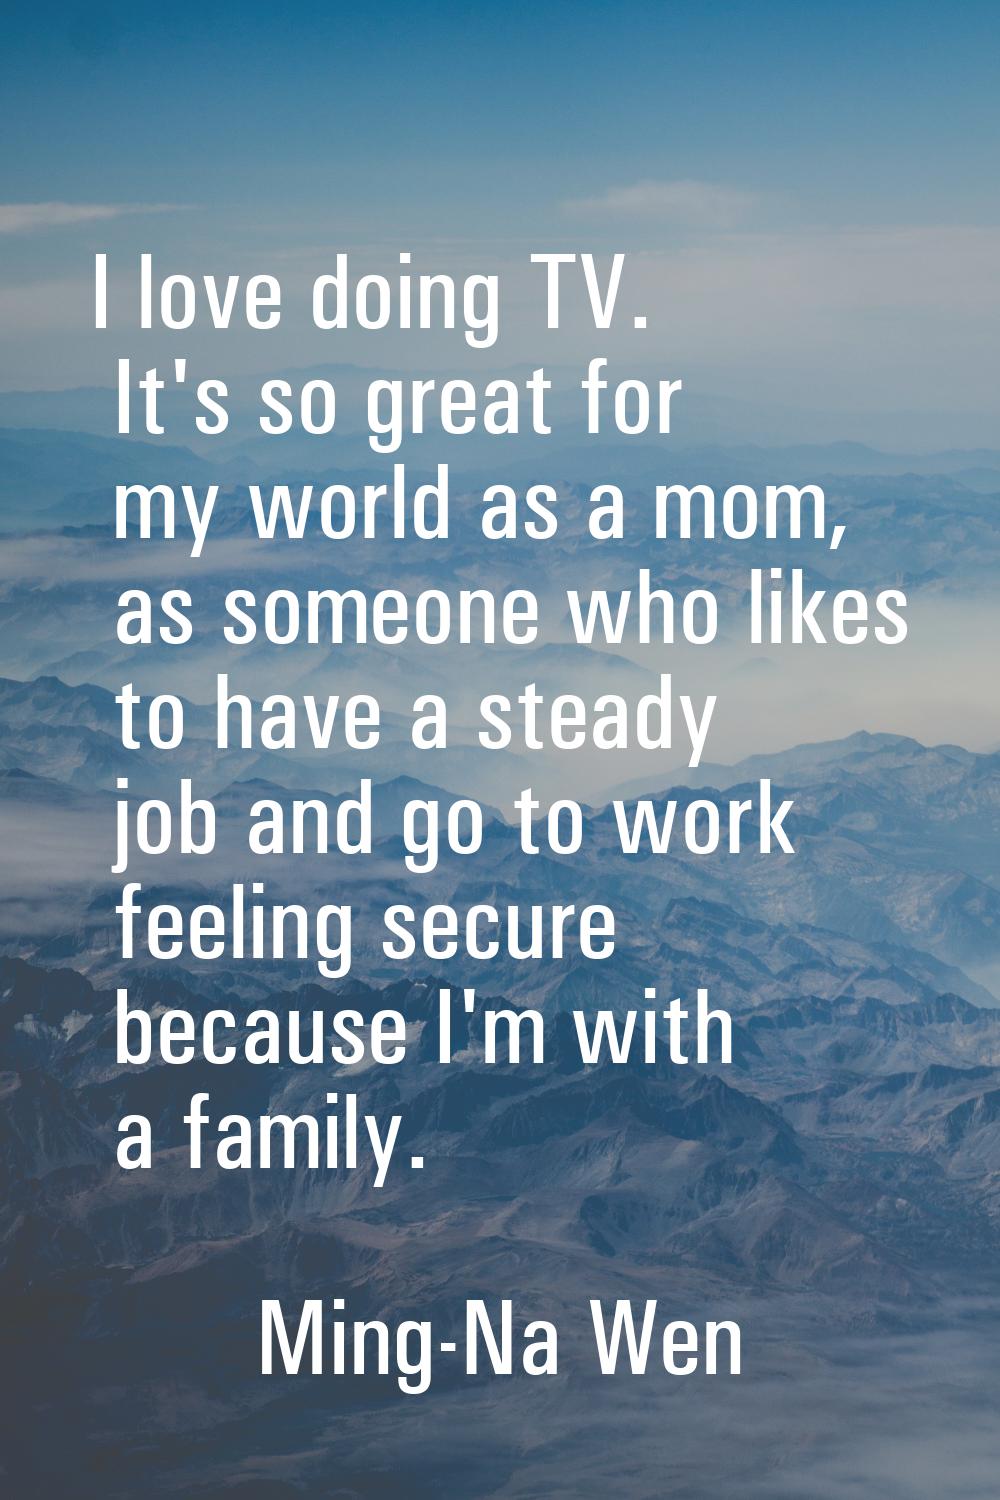 I love doing TV. It's so great for my world as a mom, as someone who likes to have a steady job and